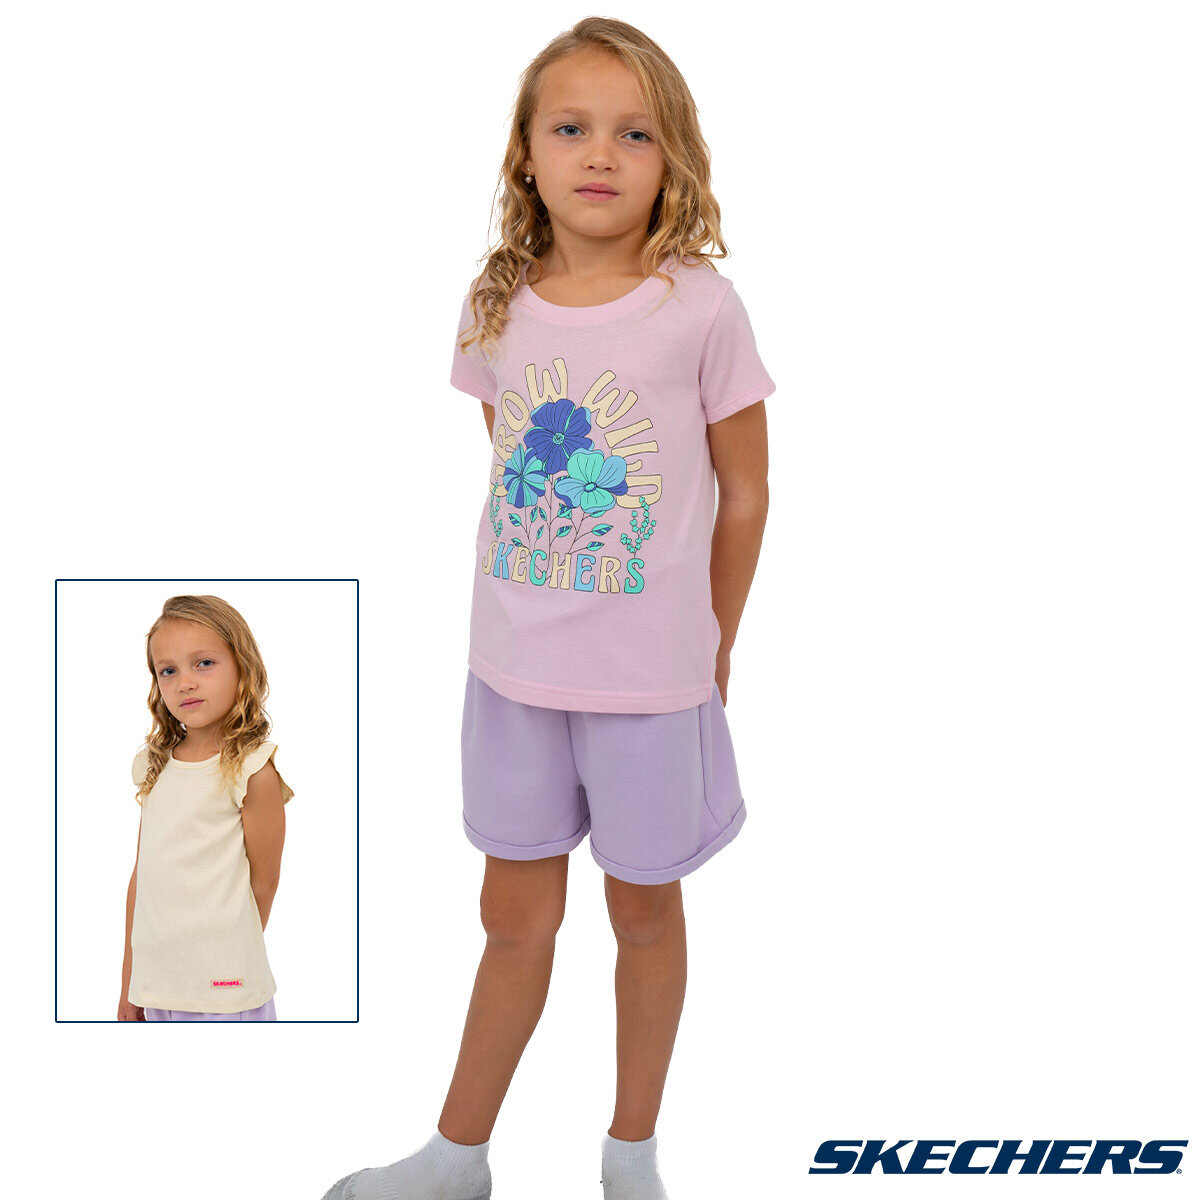 Skechers Kids 3 Piece Set with x2 T-Shirts and x1 Short in 4 Colours & 6 Sizes